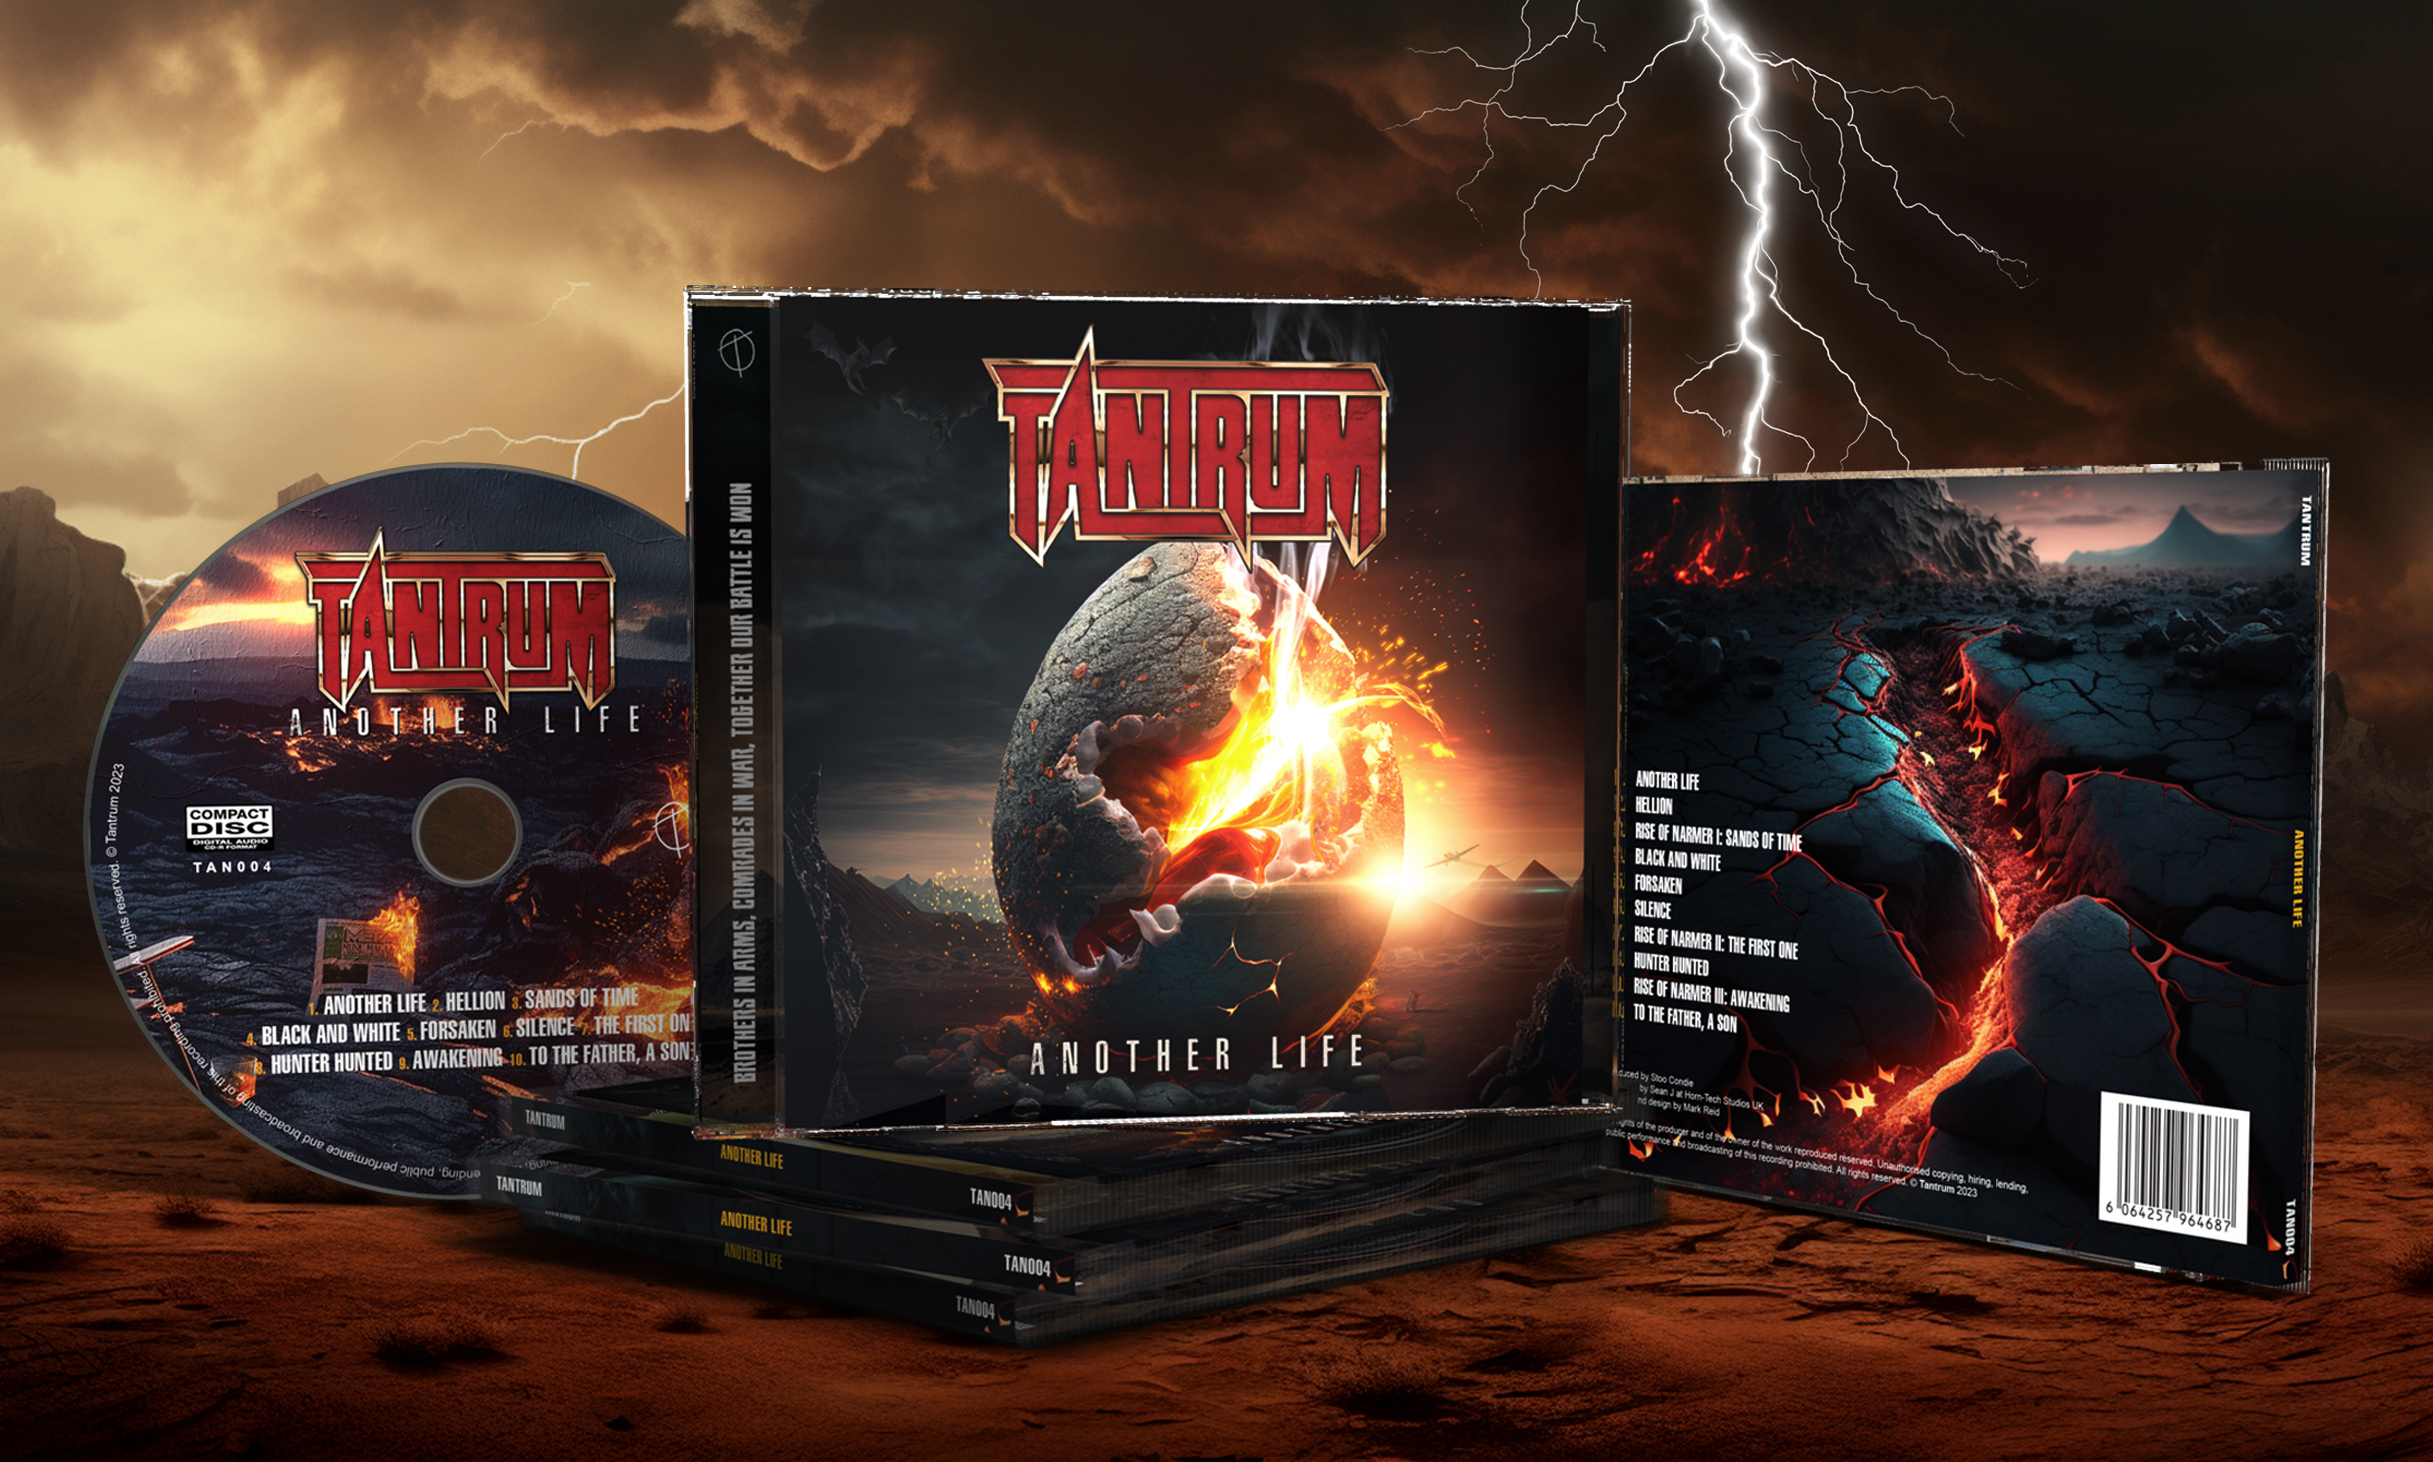 New TANTRUM album available for pre-order as well as exclusive limited edition